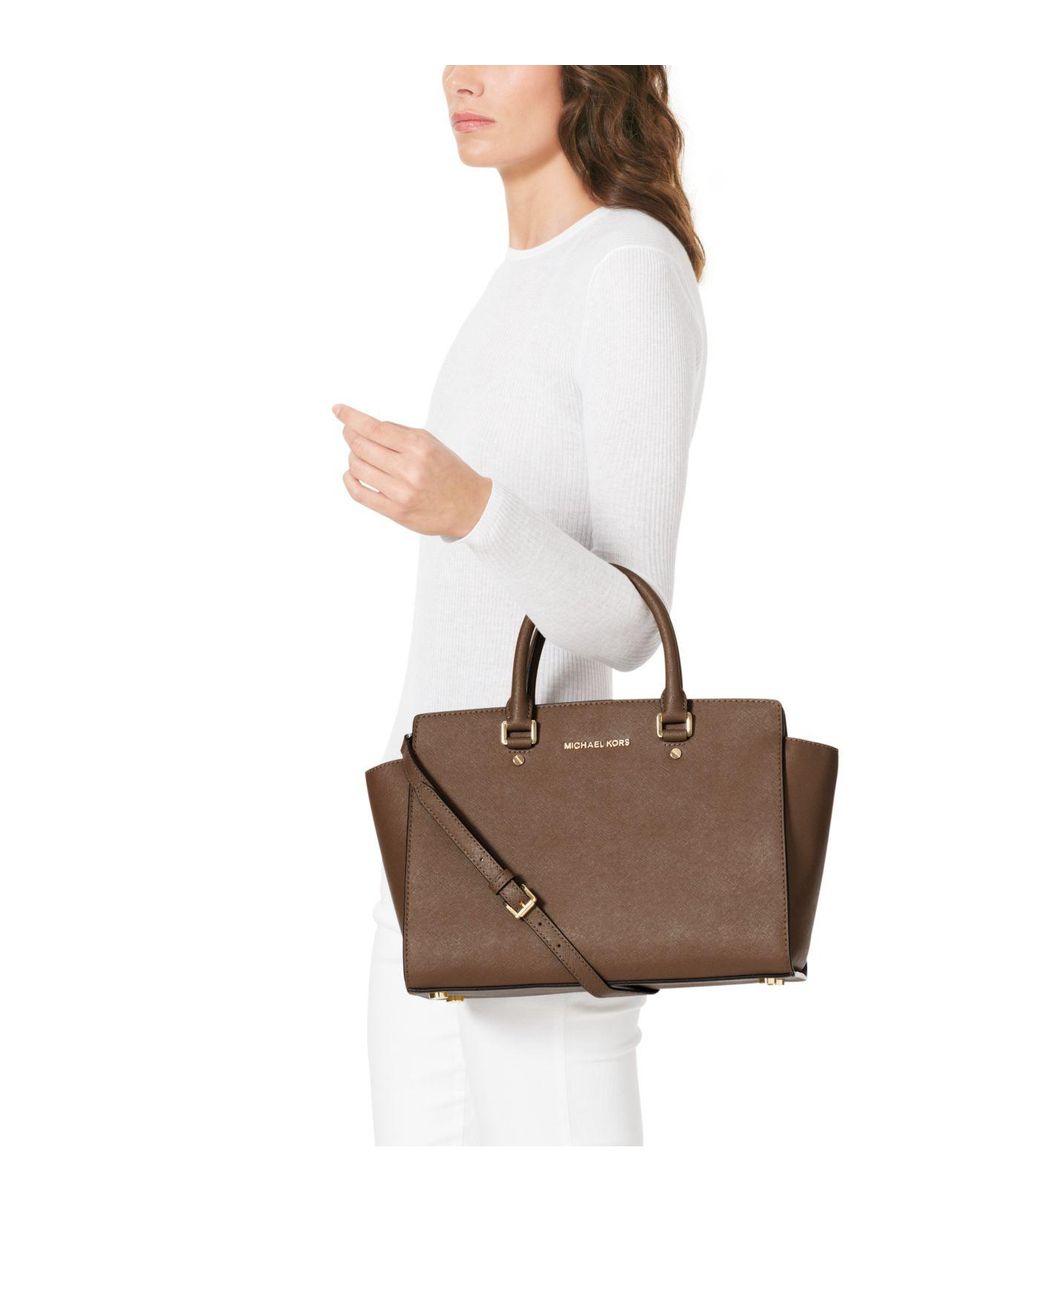 Michael Kors Selma Large Saffiano Leather Satchel in Brown | Lyst